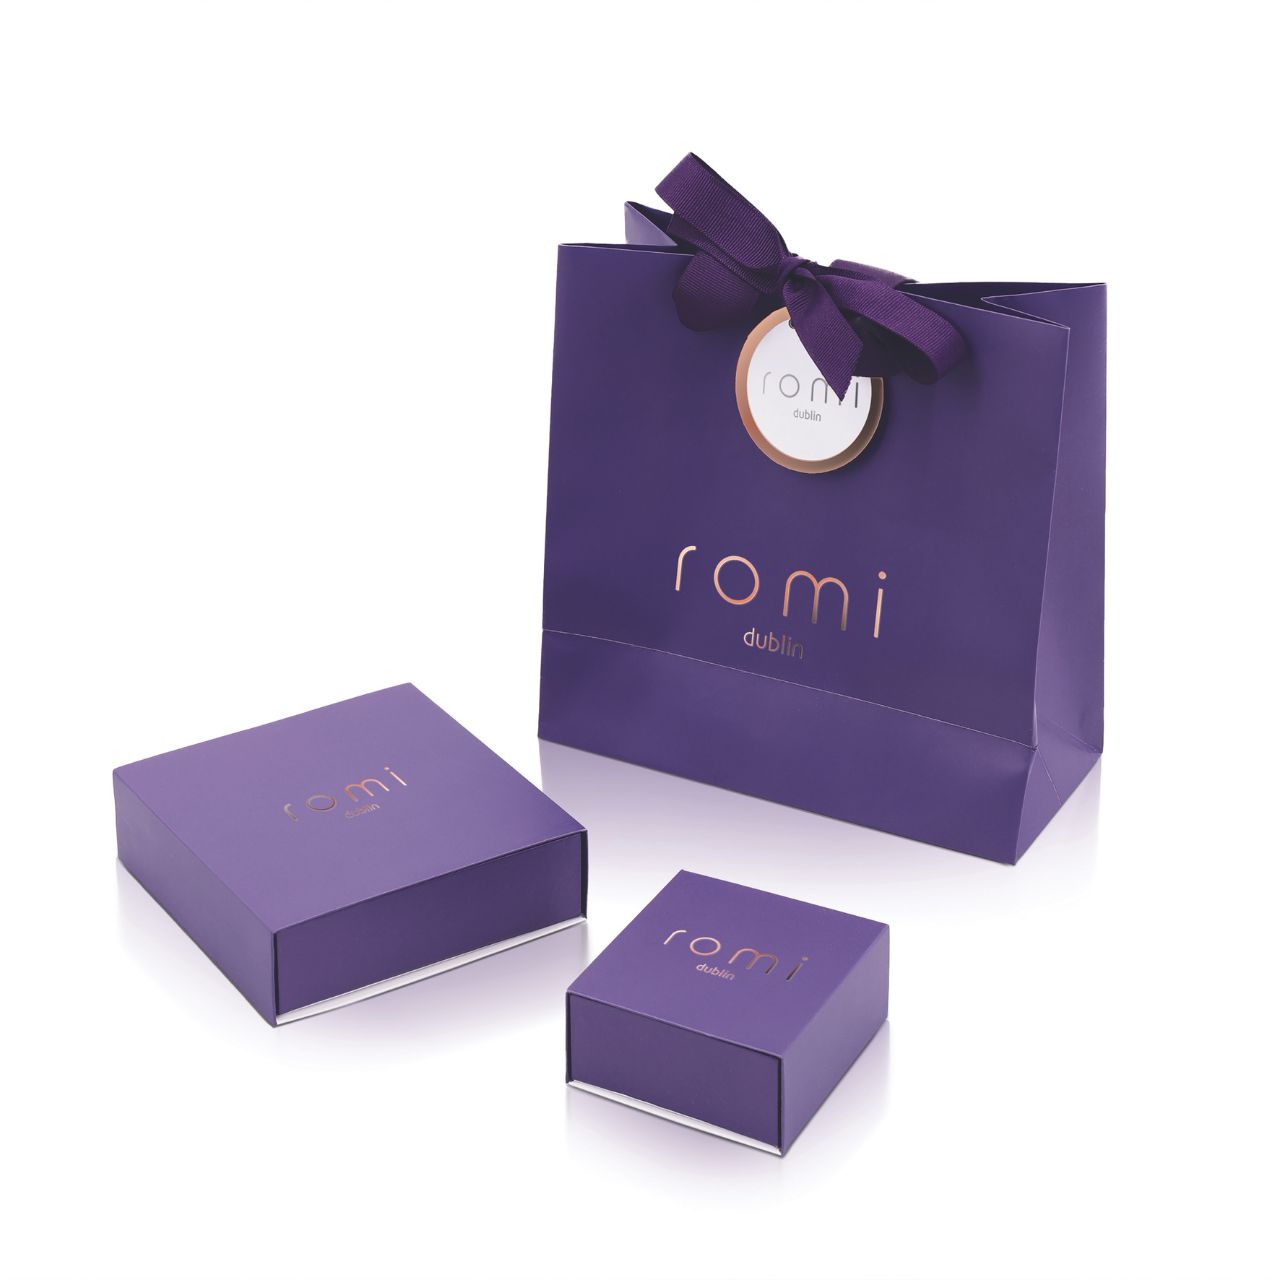 Romi Dublin Silver Chain Earrings  This easy-to-wear jewellery collection was inspired by daughter Romi who loves to style and accessorise. An outfit isn’t complete until the perfect pieces of jewellery and accessories have been selected to enhance it.